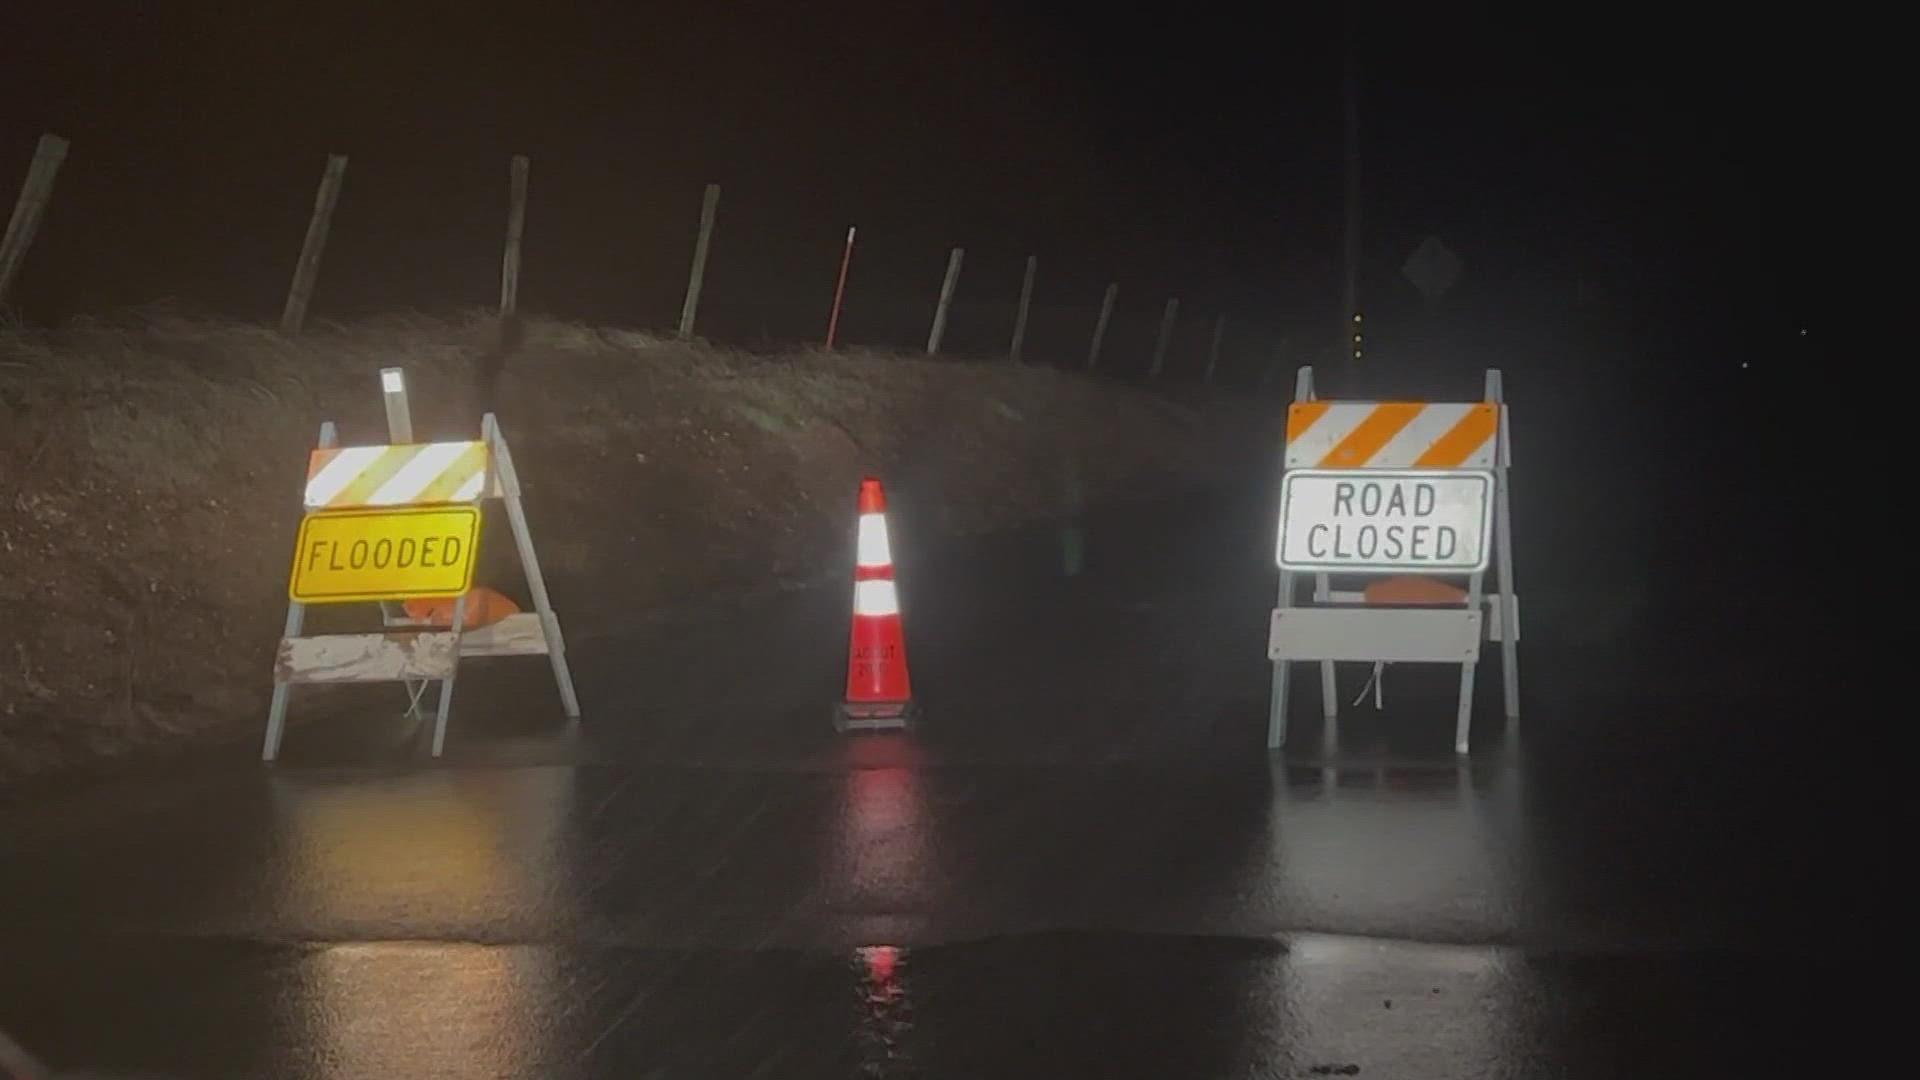 California Highway Patrol East Sacramento is warning travelers not to drive around flooded roadway barricades because of the dangers of what could be in still water